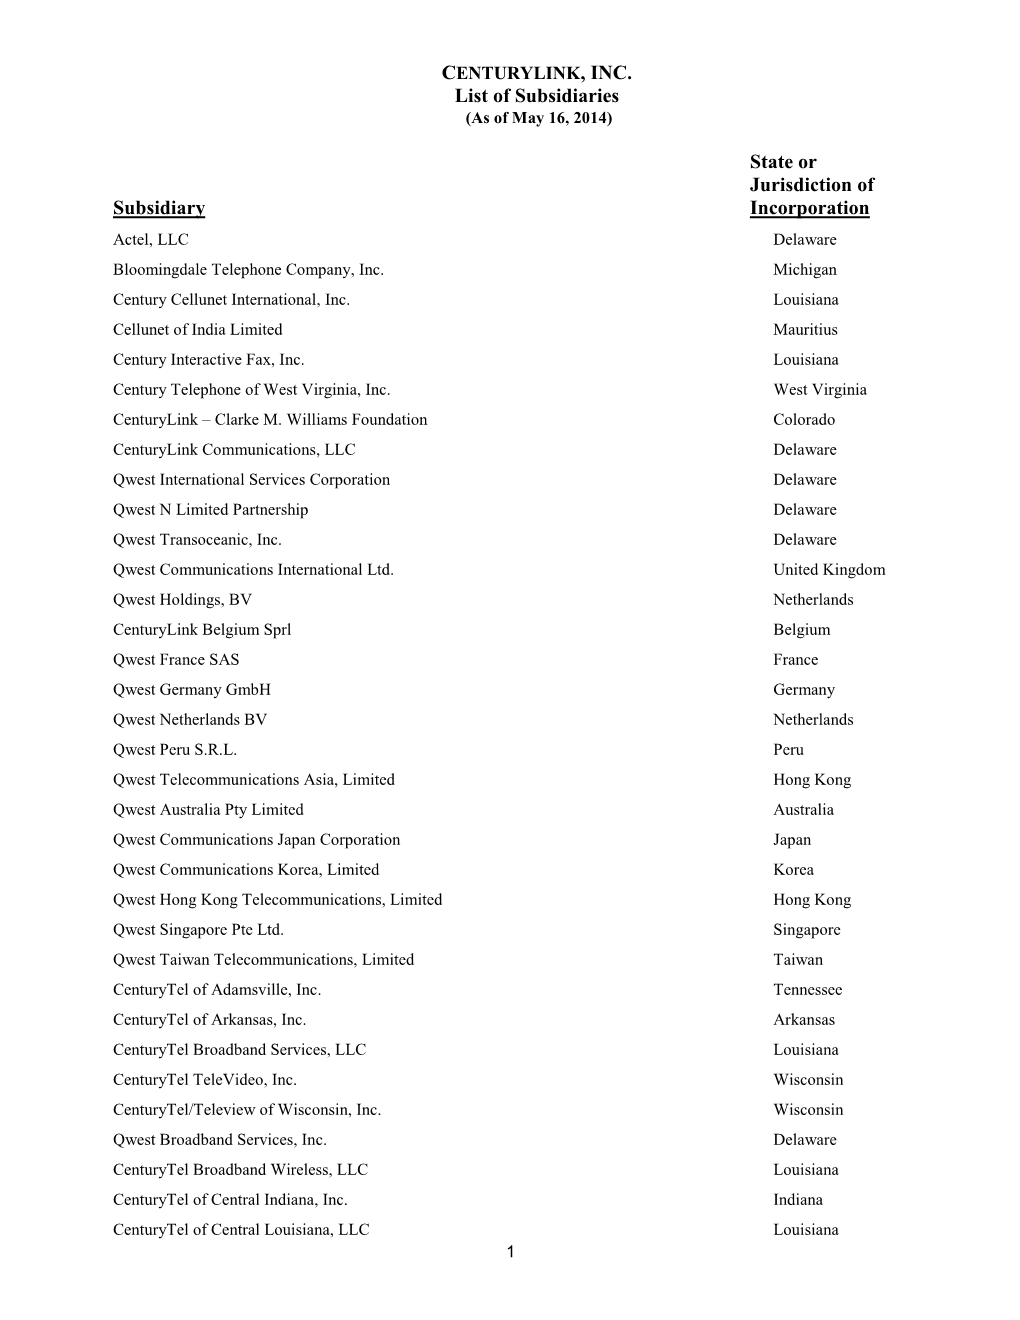 CENTURYLINK, INC. List of Subsidiaries (As of May 16, 2014)